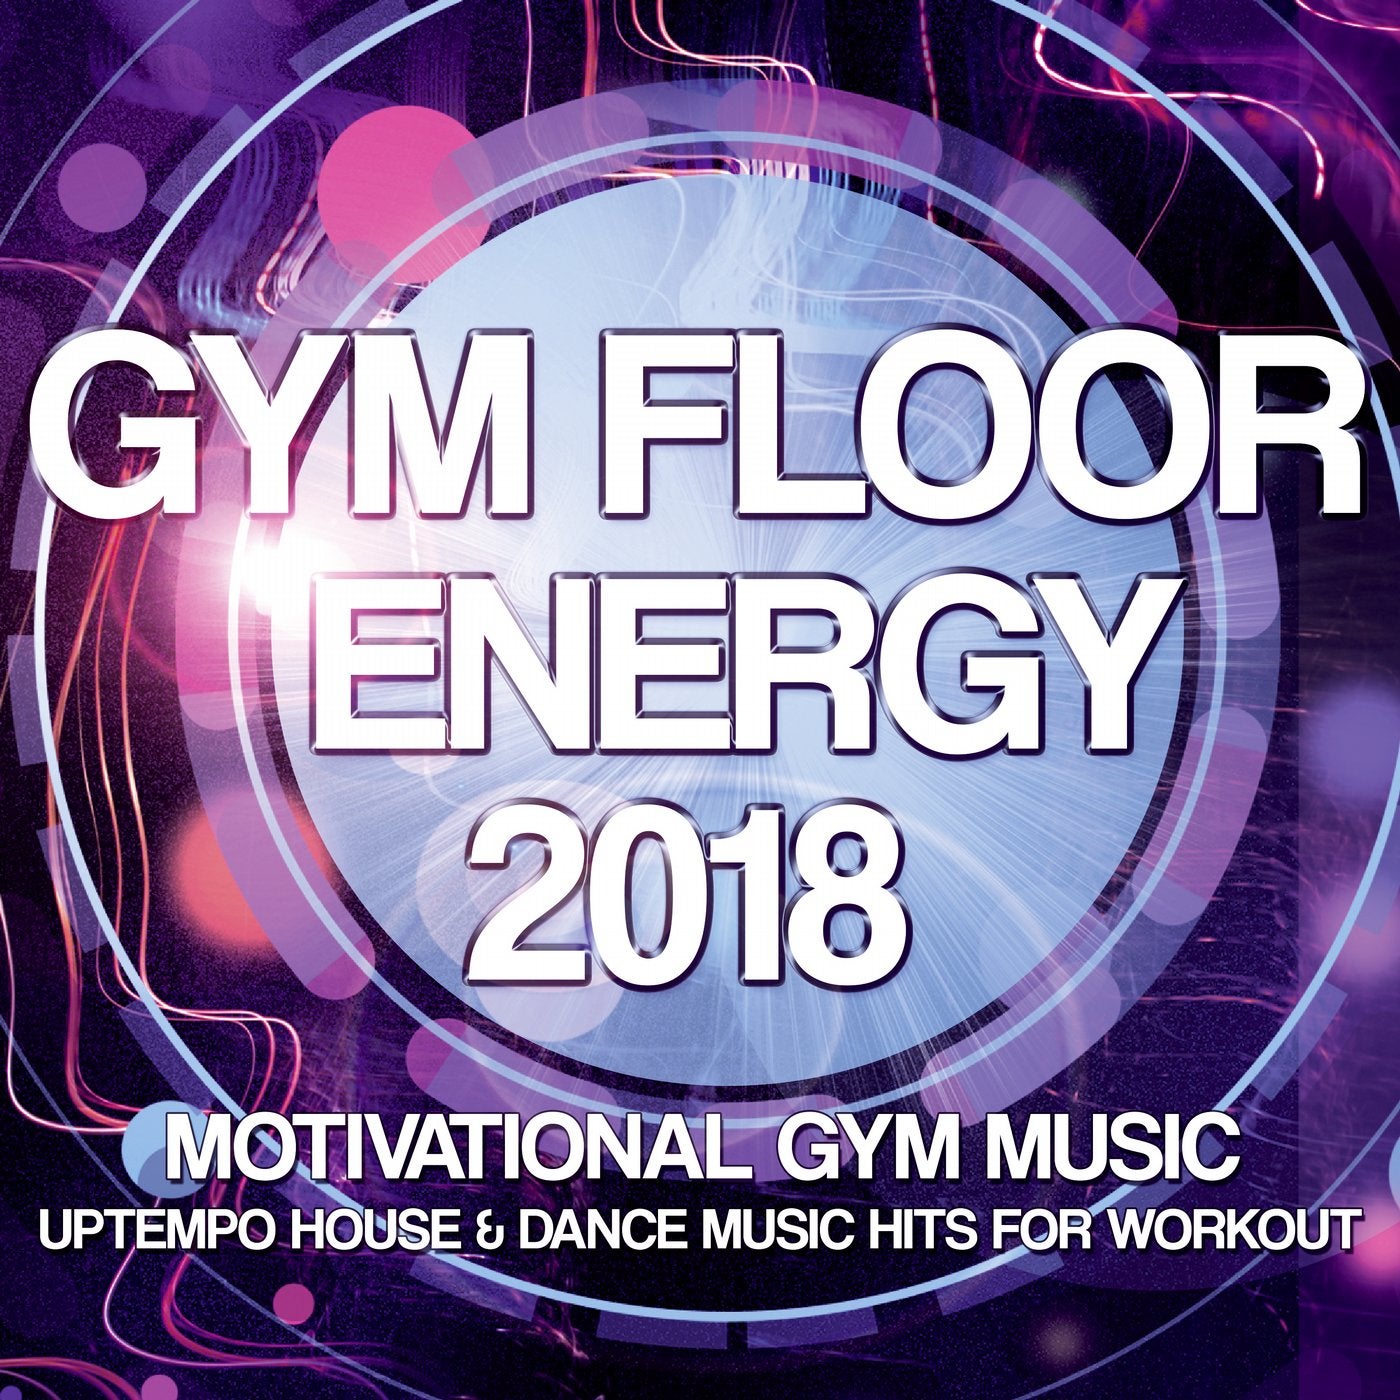 Gym Floor Energy 2018 - Motivational Gym Music - Uptempo House & Dance Music Hits For Workout